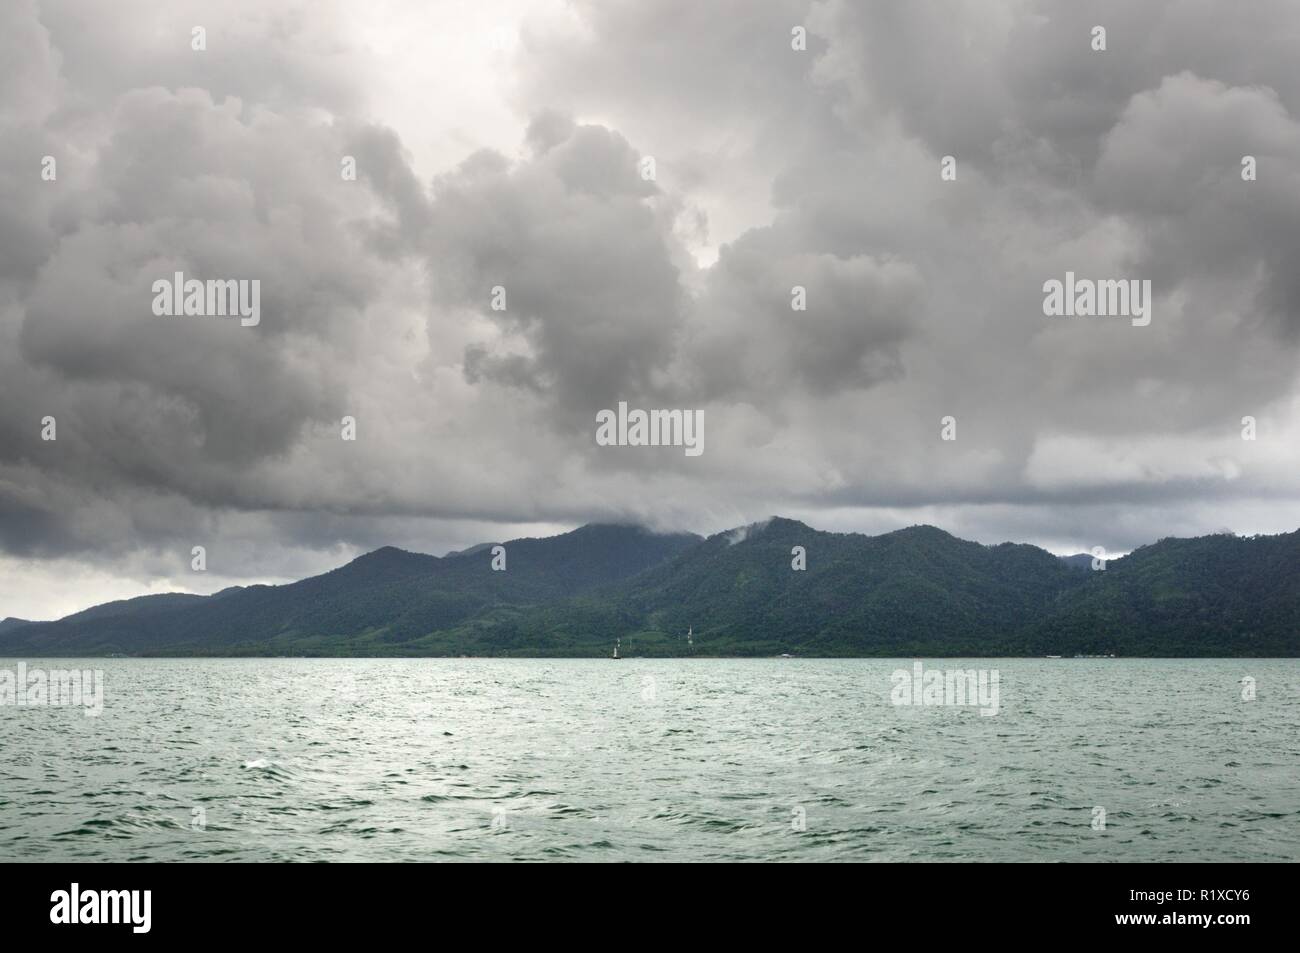 Landscape with tropical sea, monsoon storm heavy clouds and tropical Koh Chang island on horizon in Thailand Stock Photo